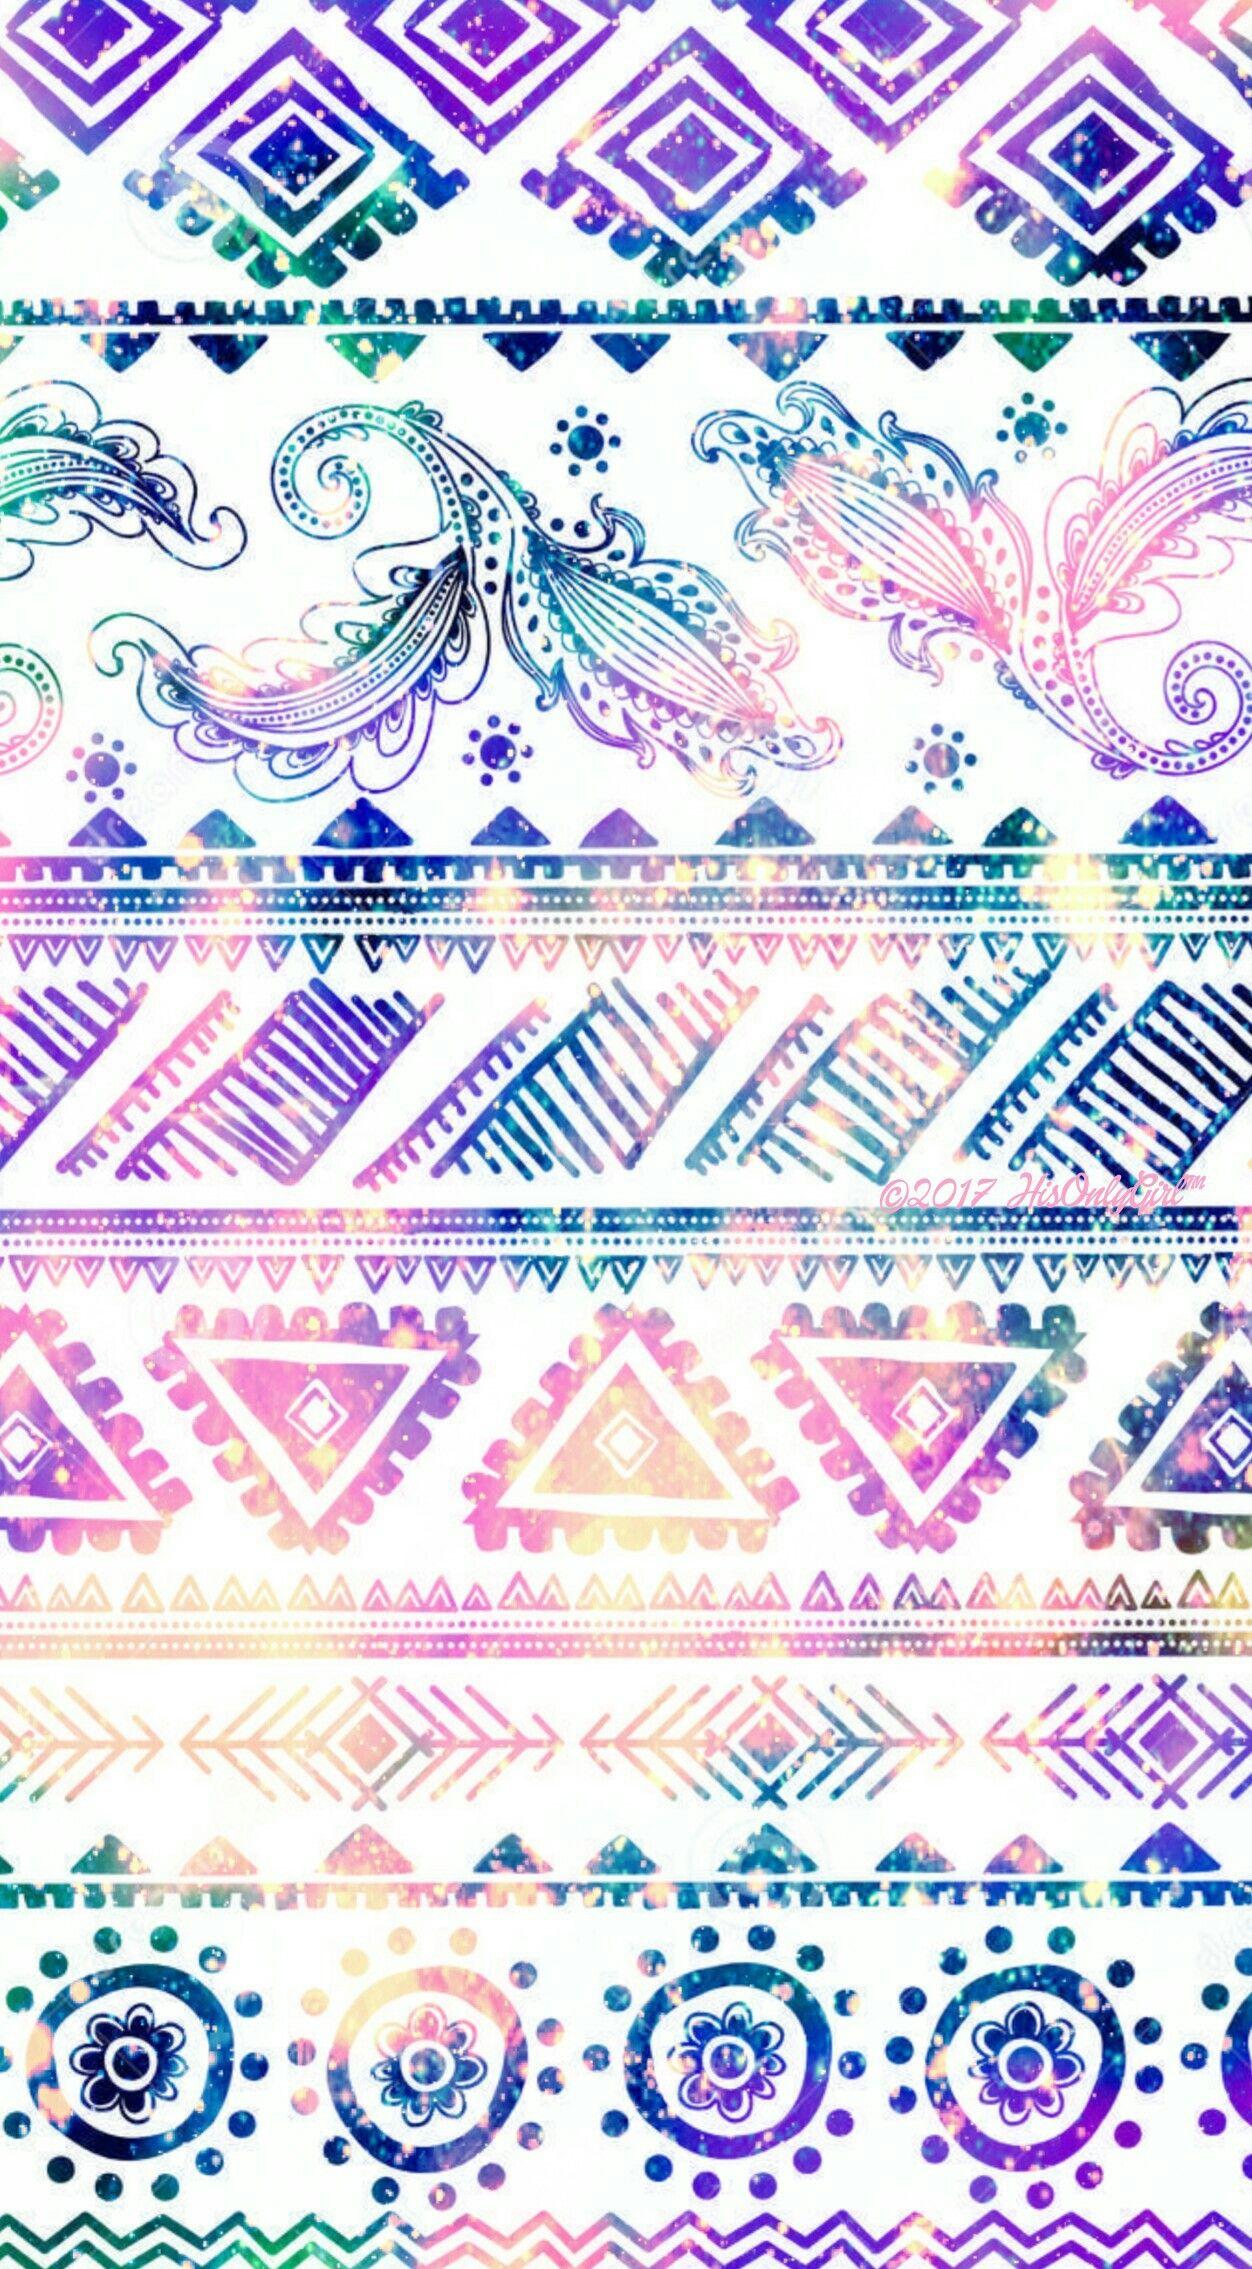 Tribal Galaxy IPhone Android Wallpaper I Created For The App